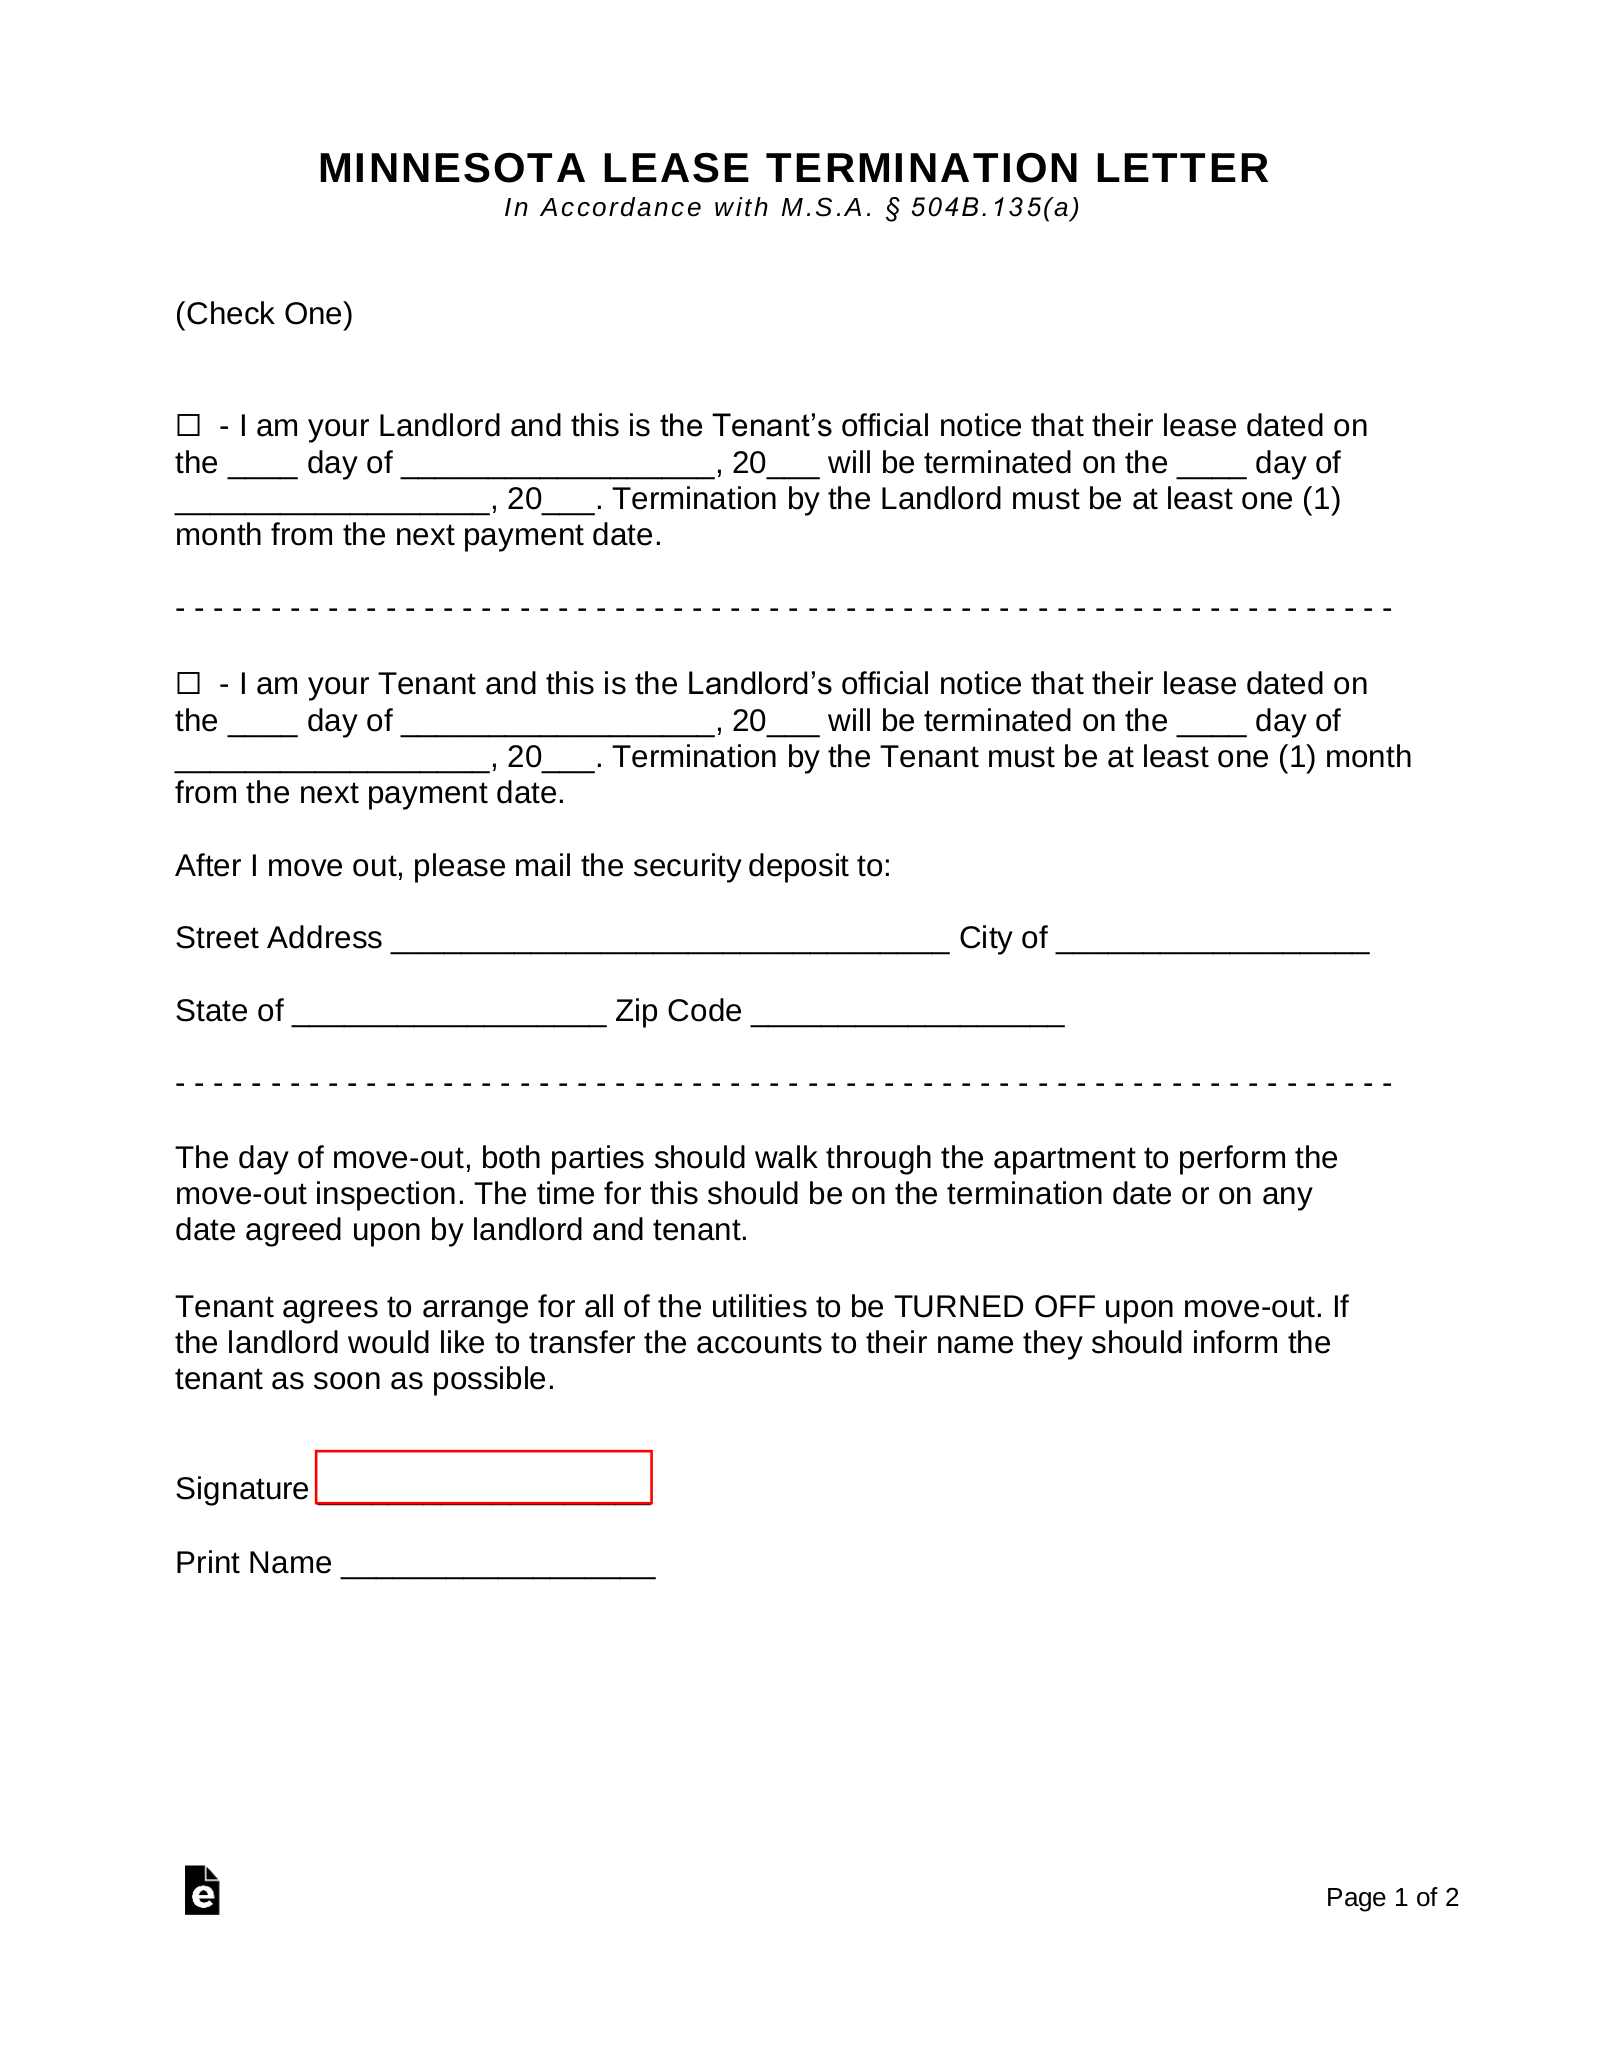 Rental Agreement Cancellation Letter from eforms.com